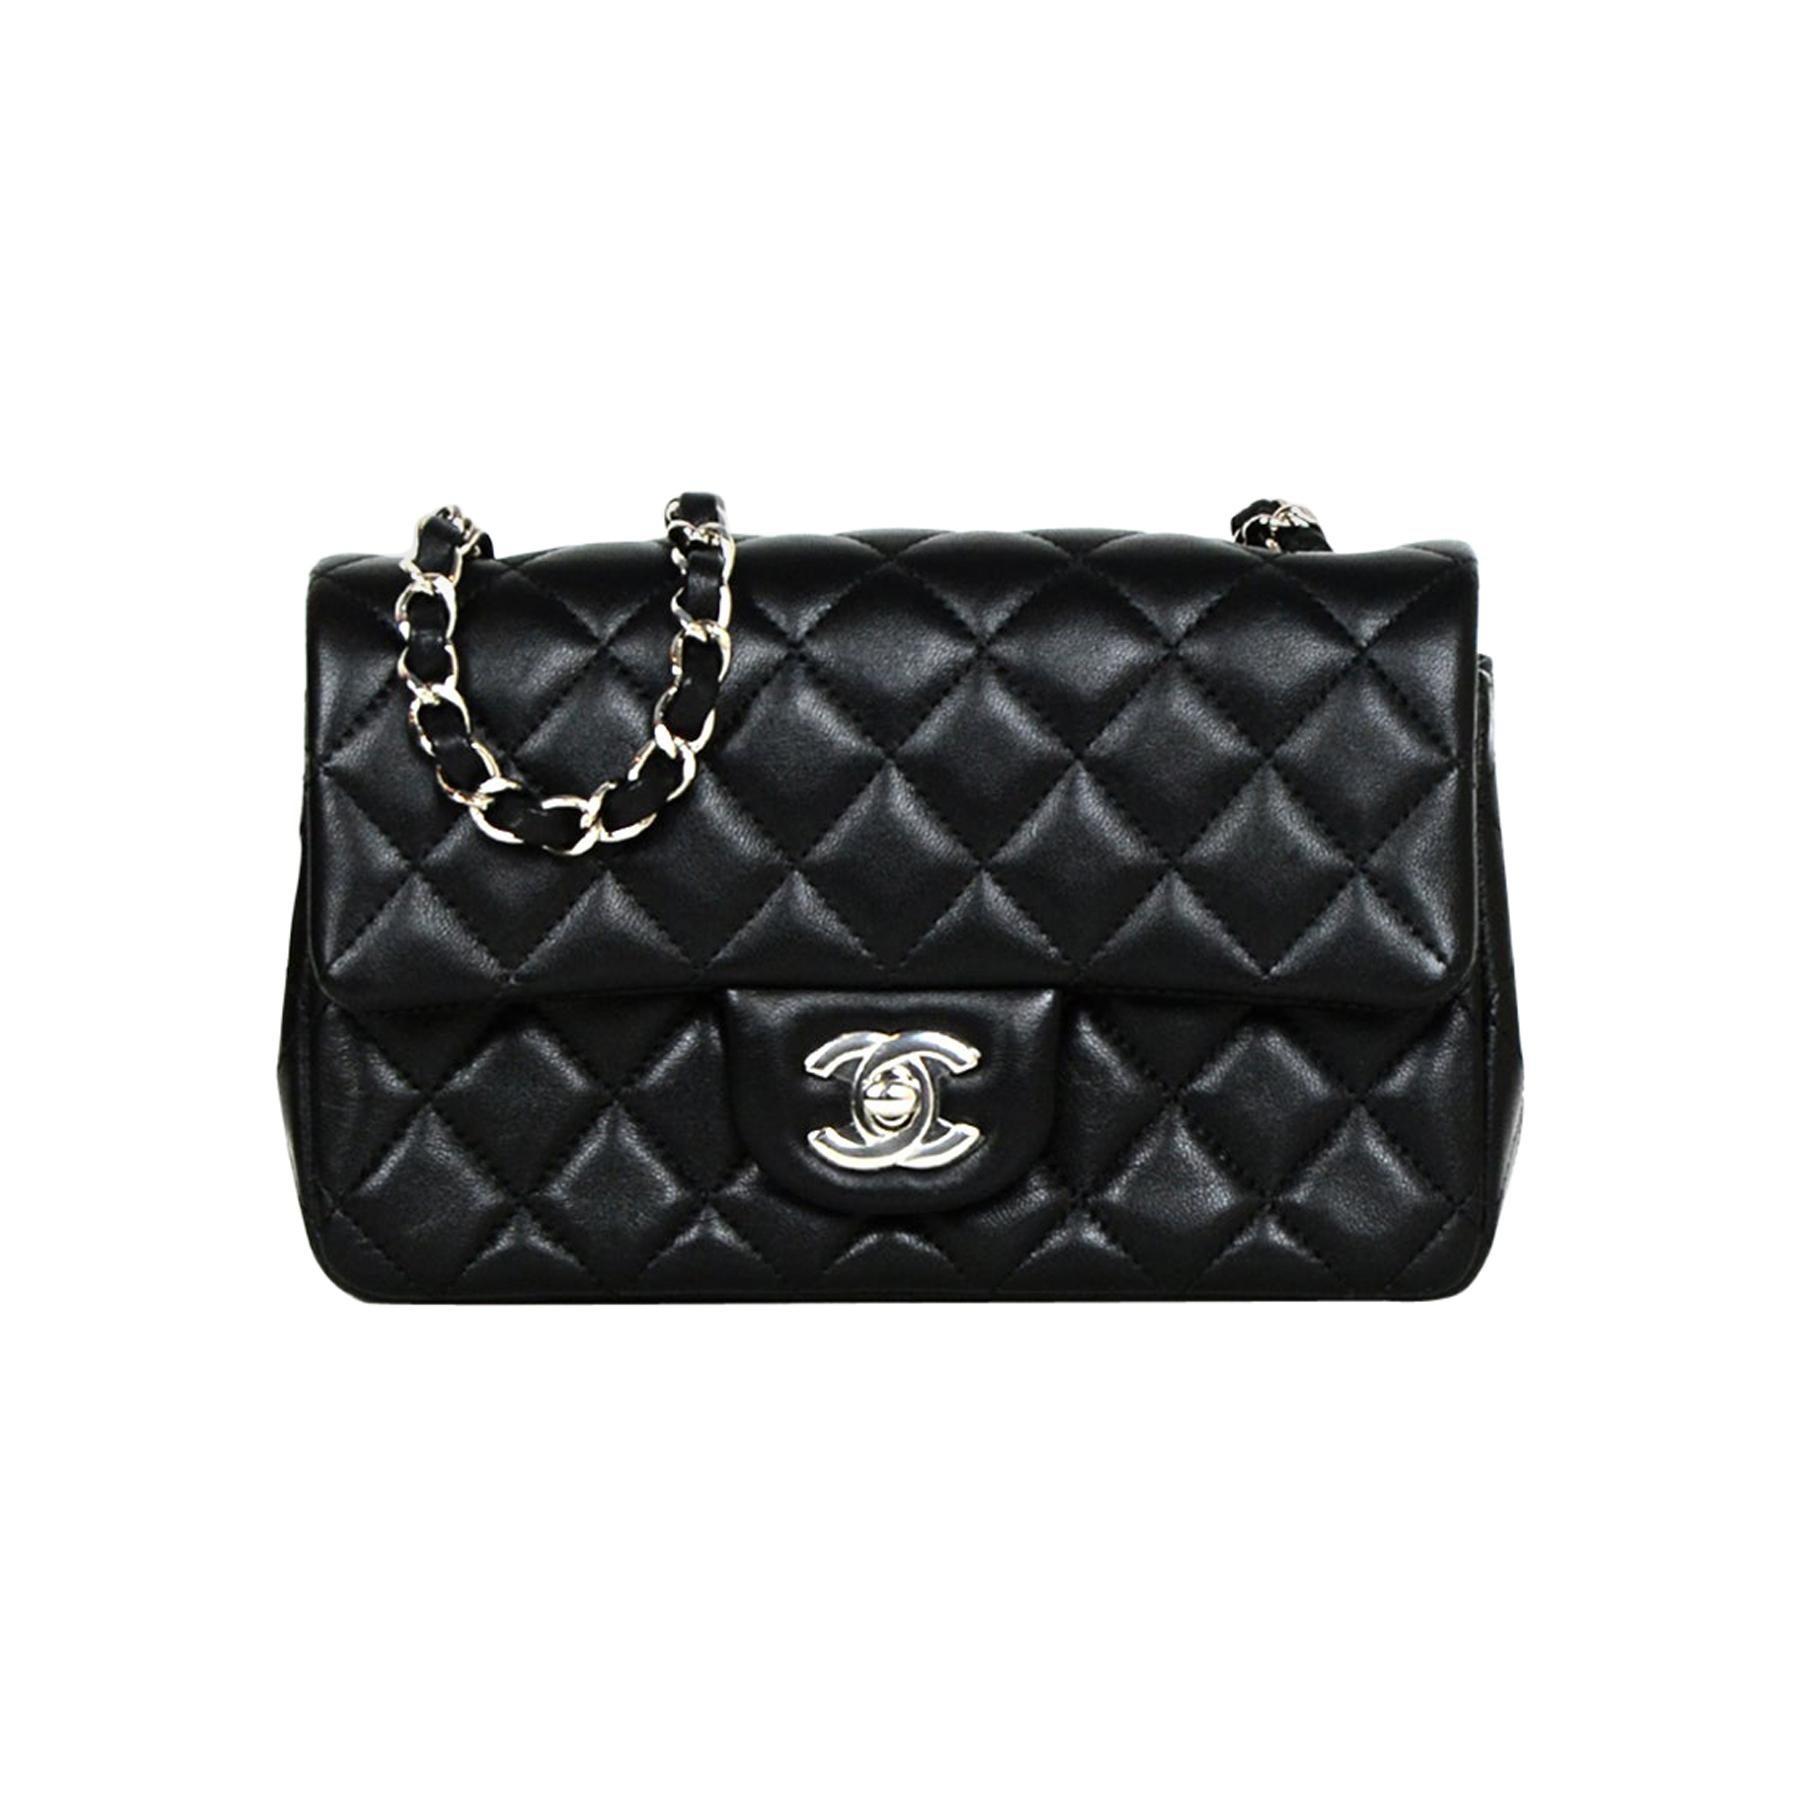 Chanel 2019 Black Lambskin Leather Quilted Mini Rectangular Classic Flap Bag